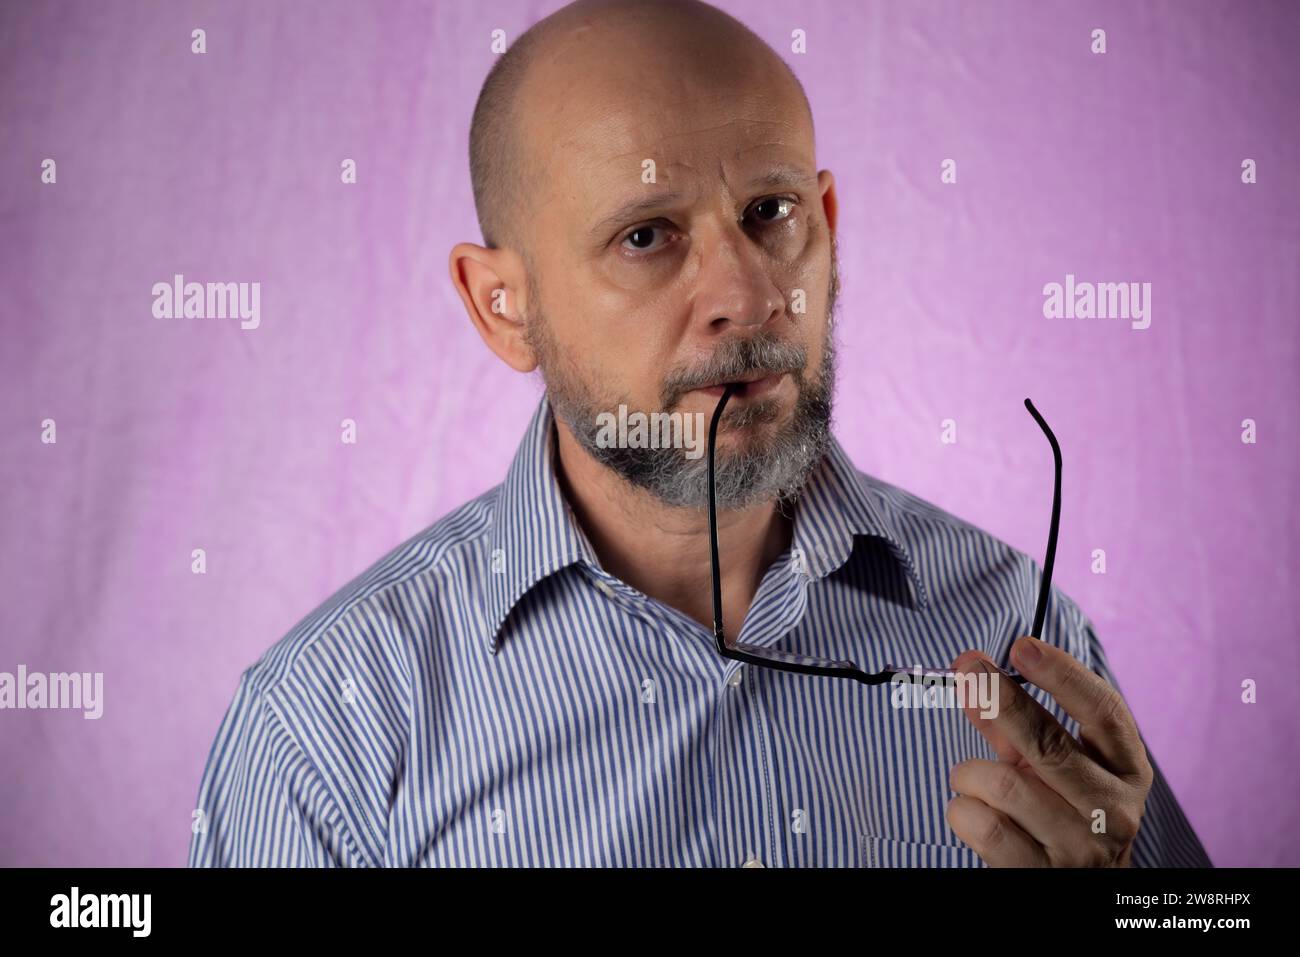 Bearded and bald man holding prescription glasses against pink background. Stock Photo